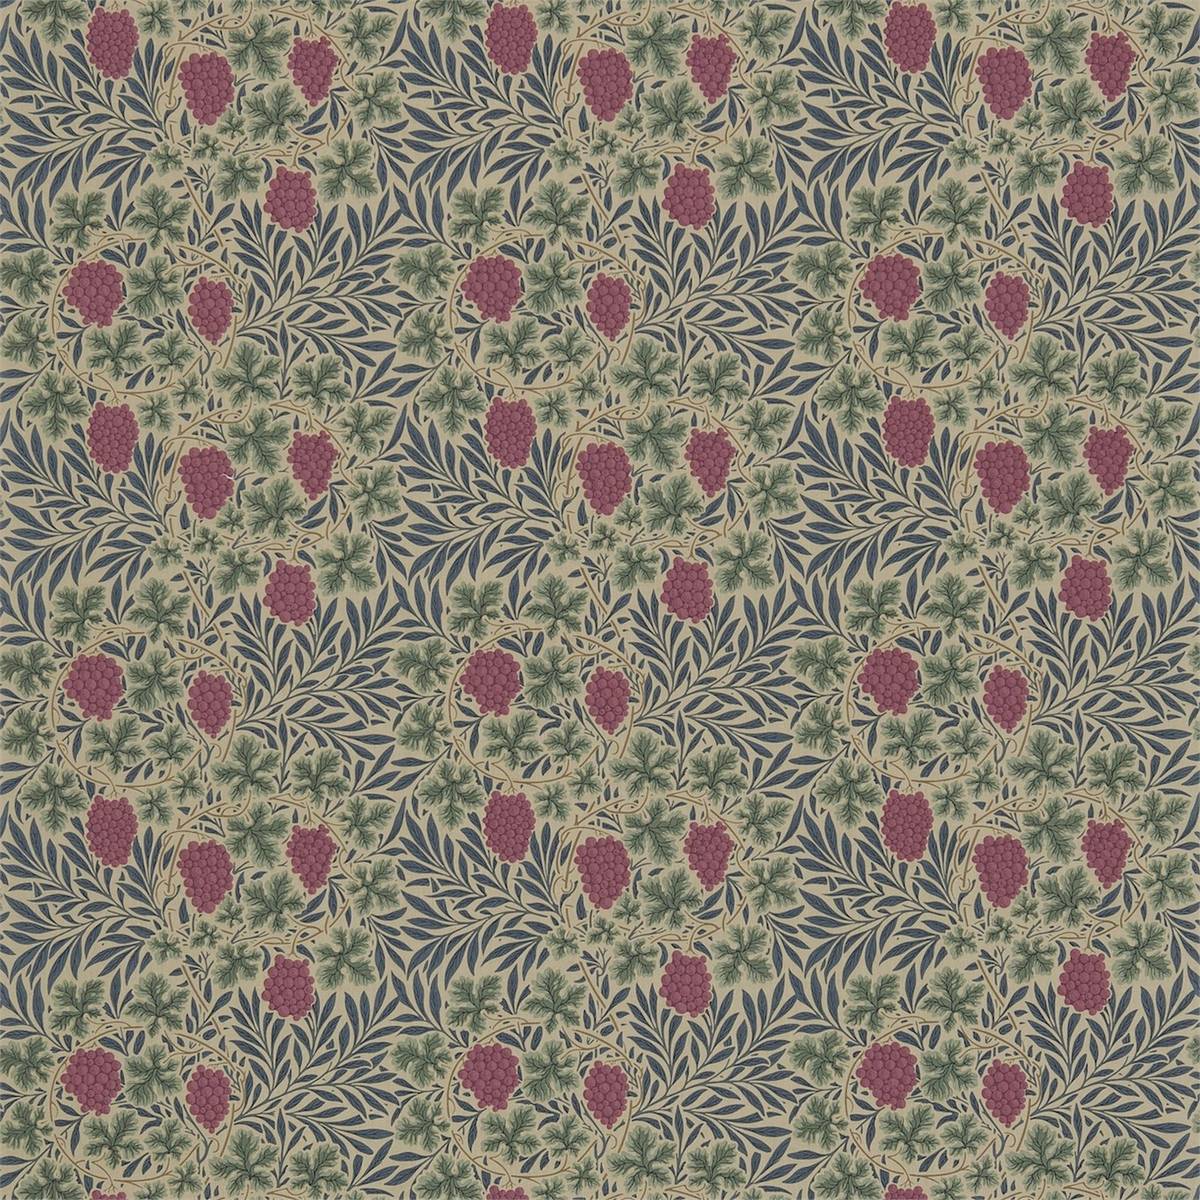 Vine Russet/Heather Fabric by William Morris & Co.